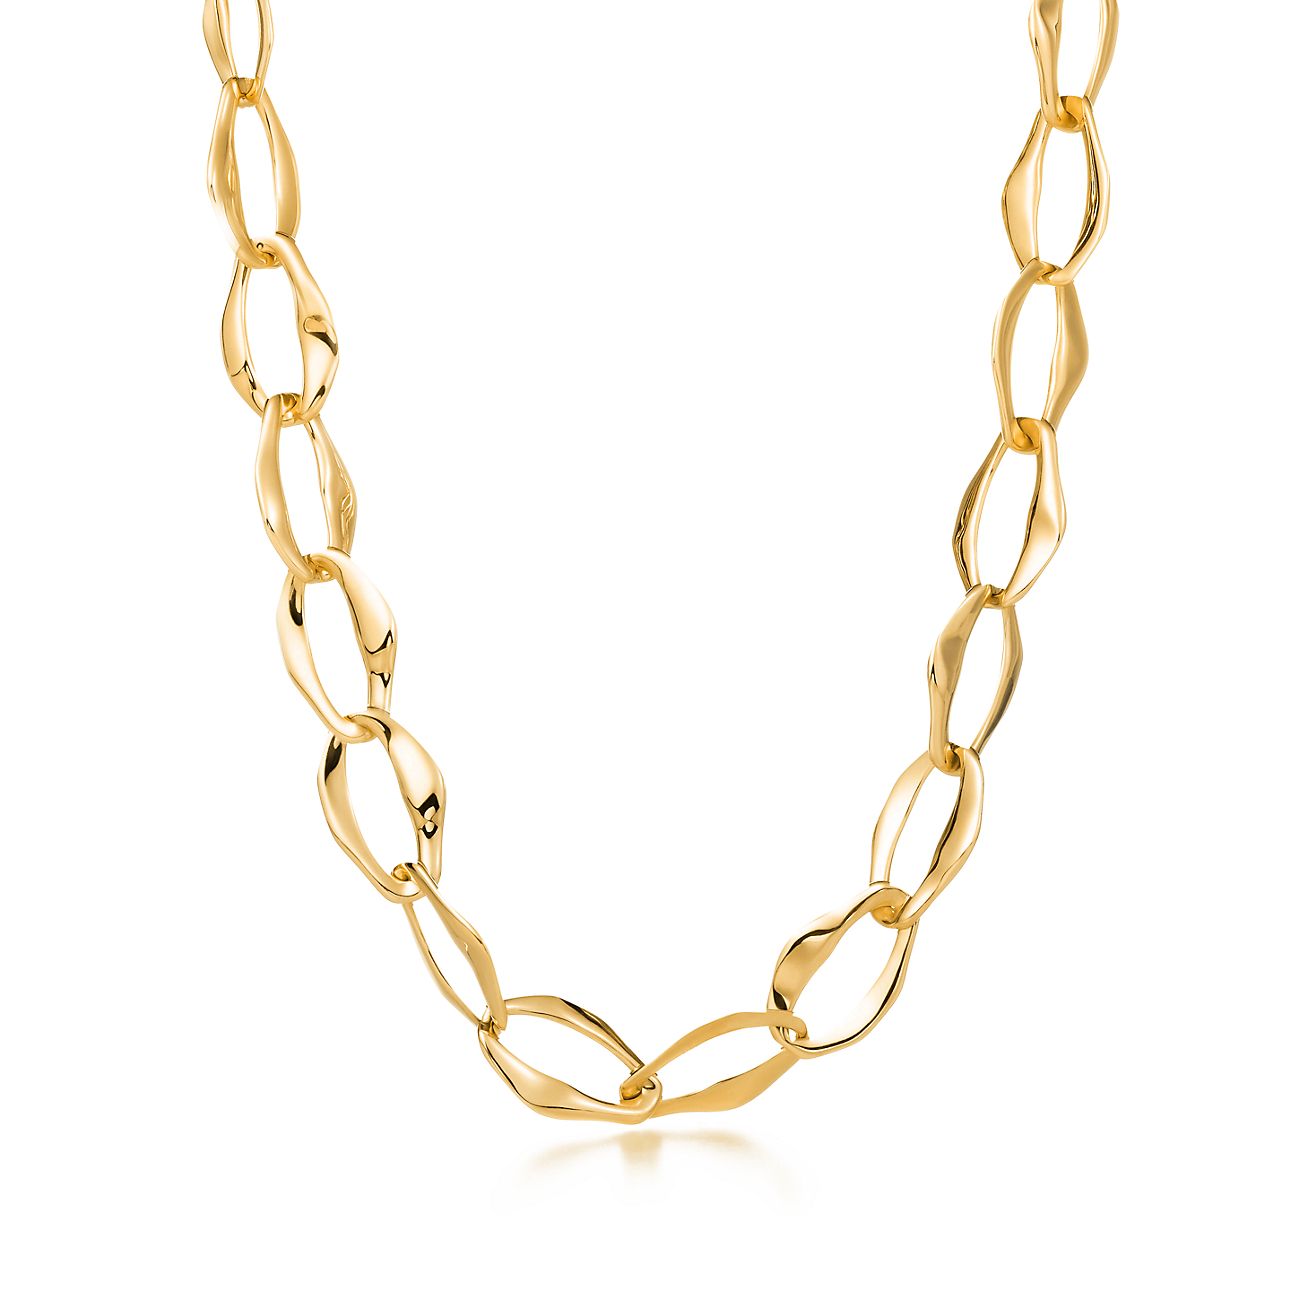 Aegean toggle necklace in 18k gold 